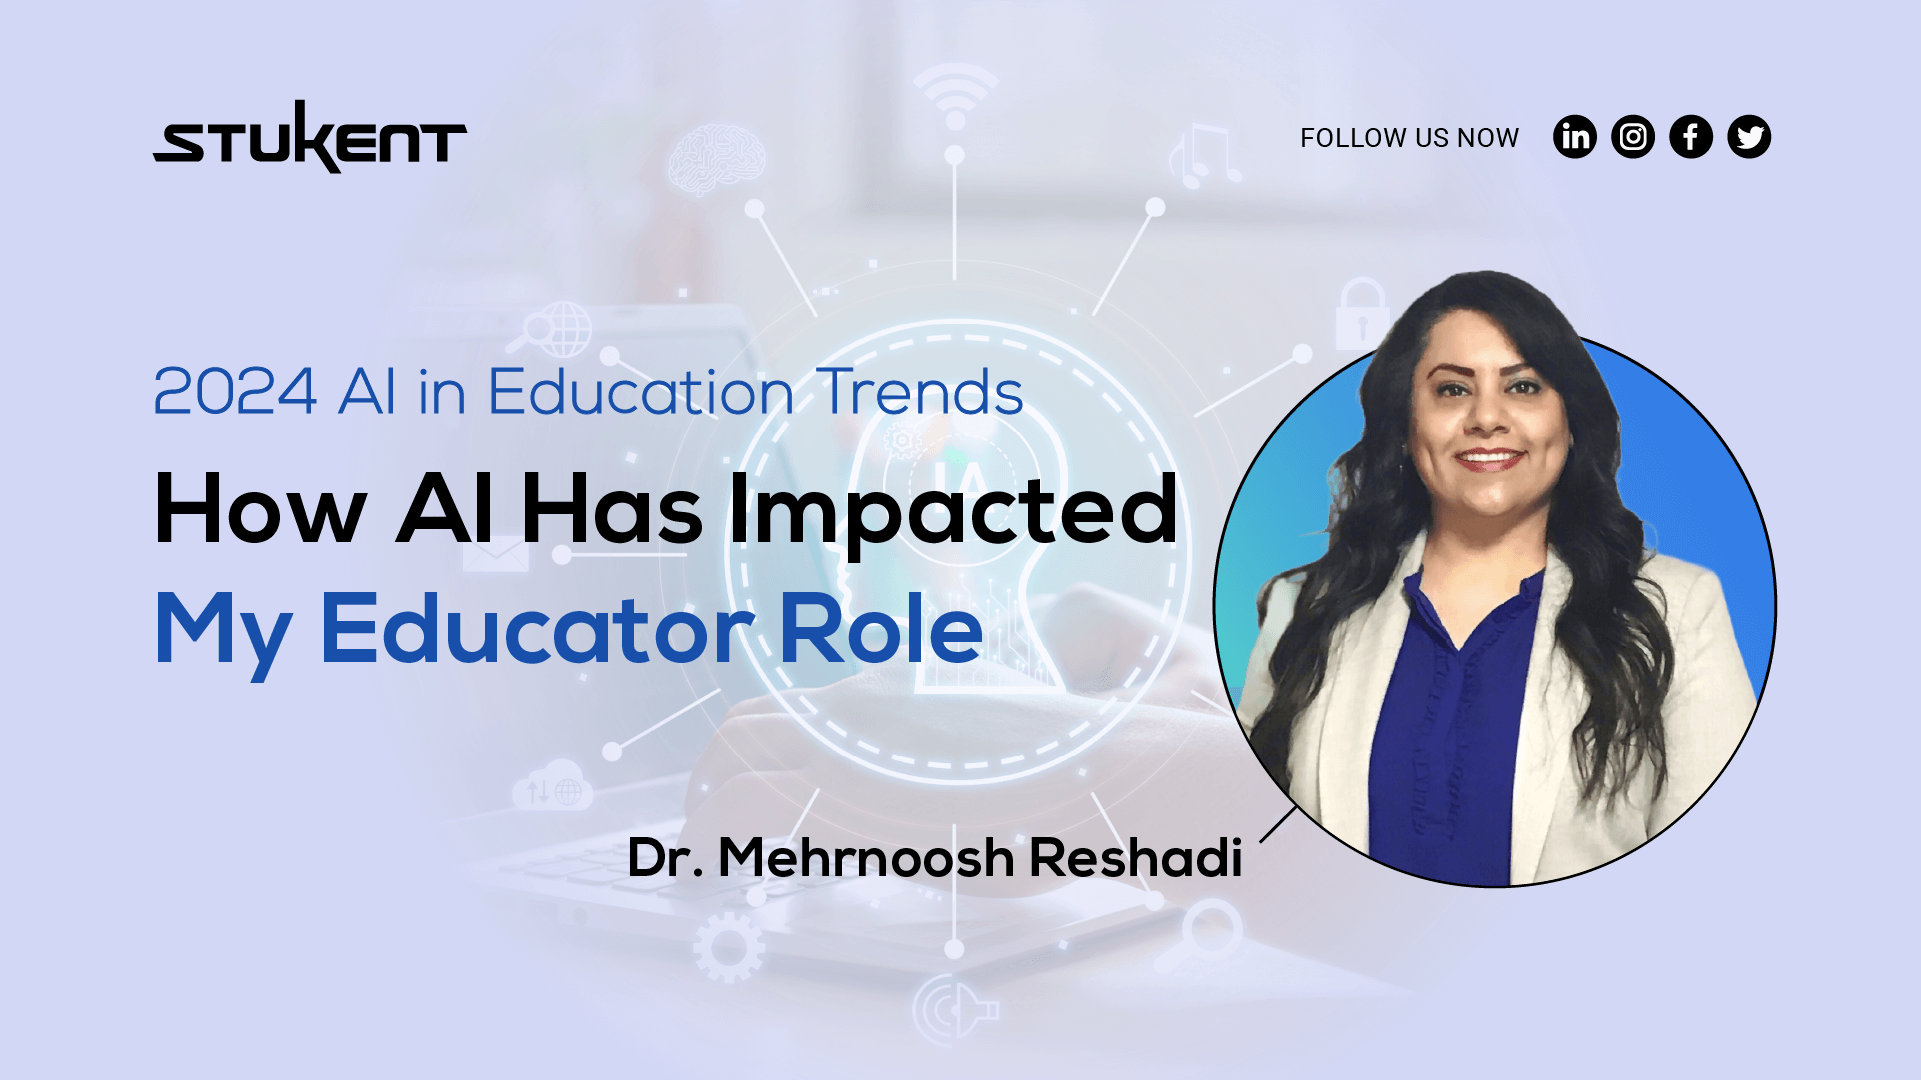 2024 AI in Education Trends: How AI Has Impacted My Educator Role